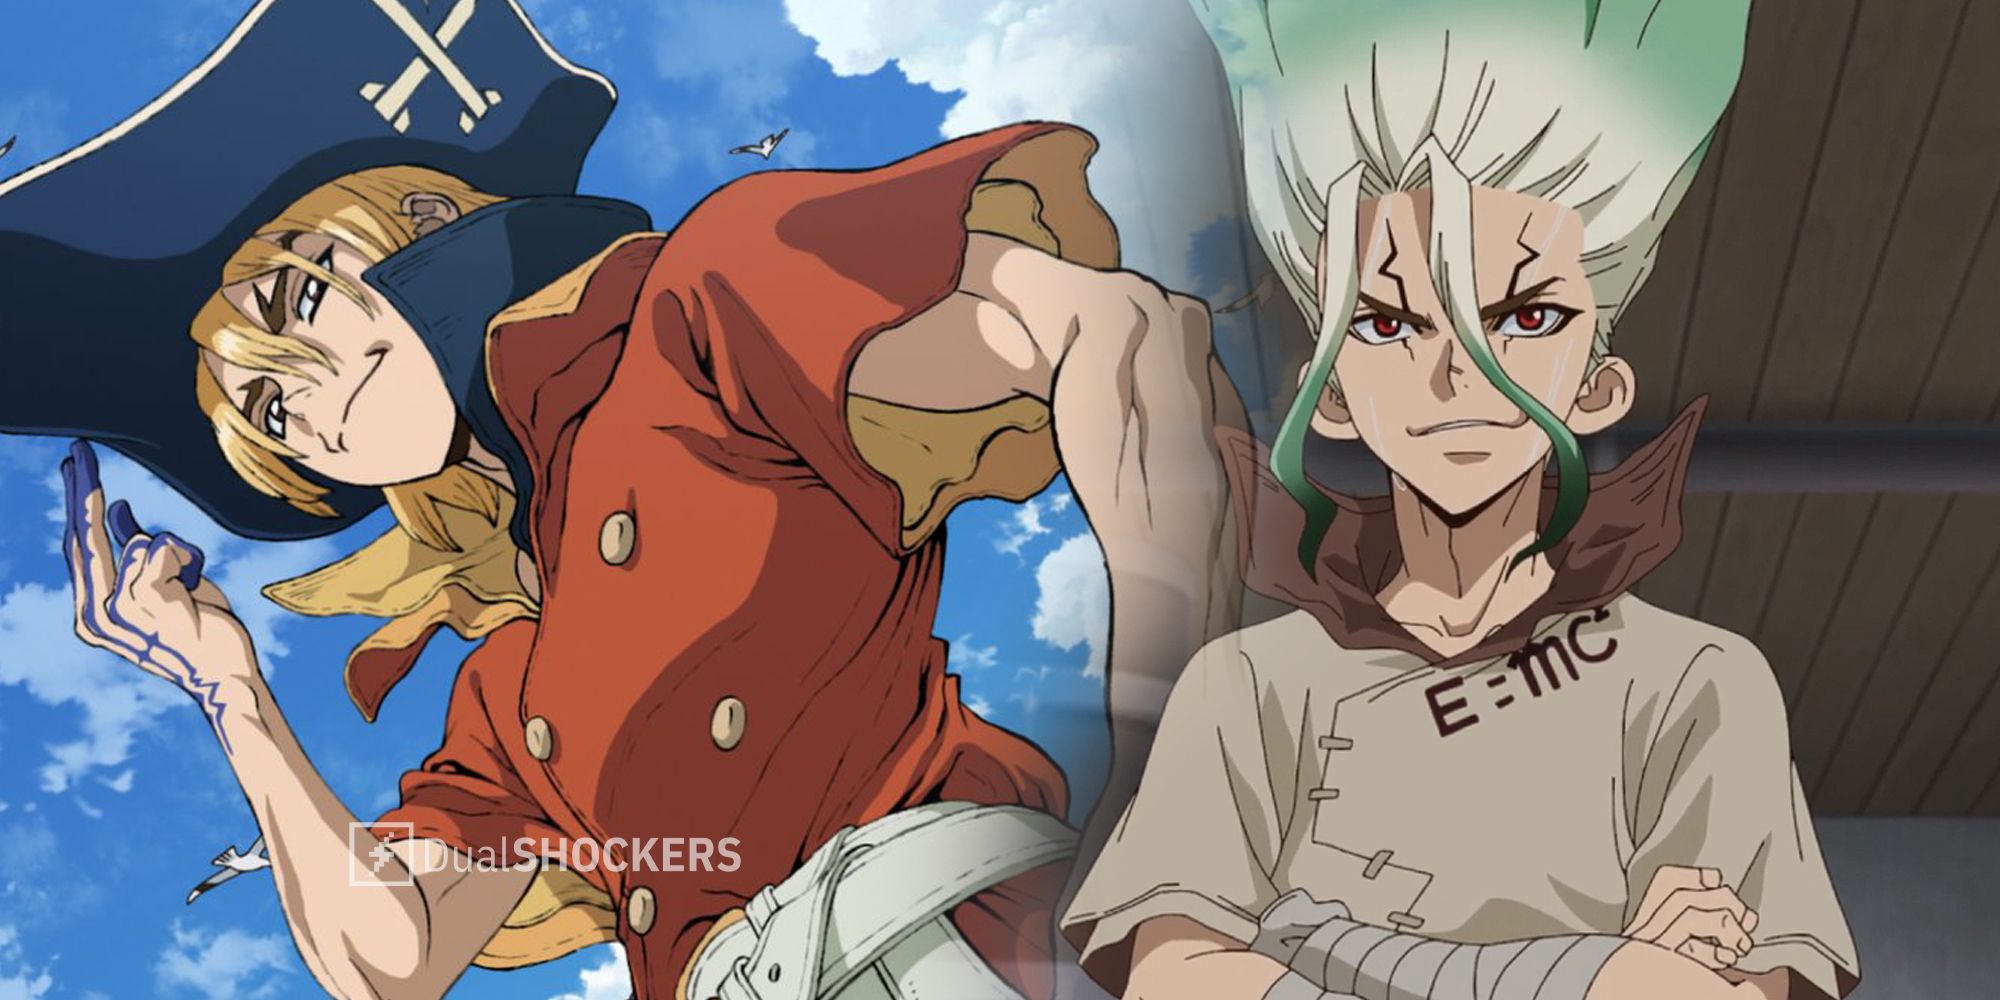 Dr. Stone Season 3 Episode 7 Release Date & Time